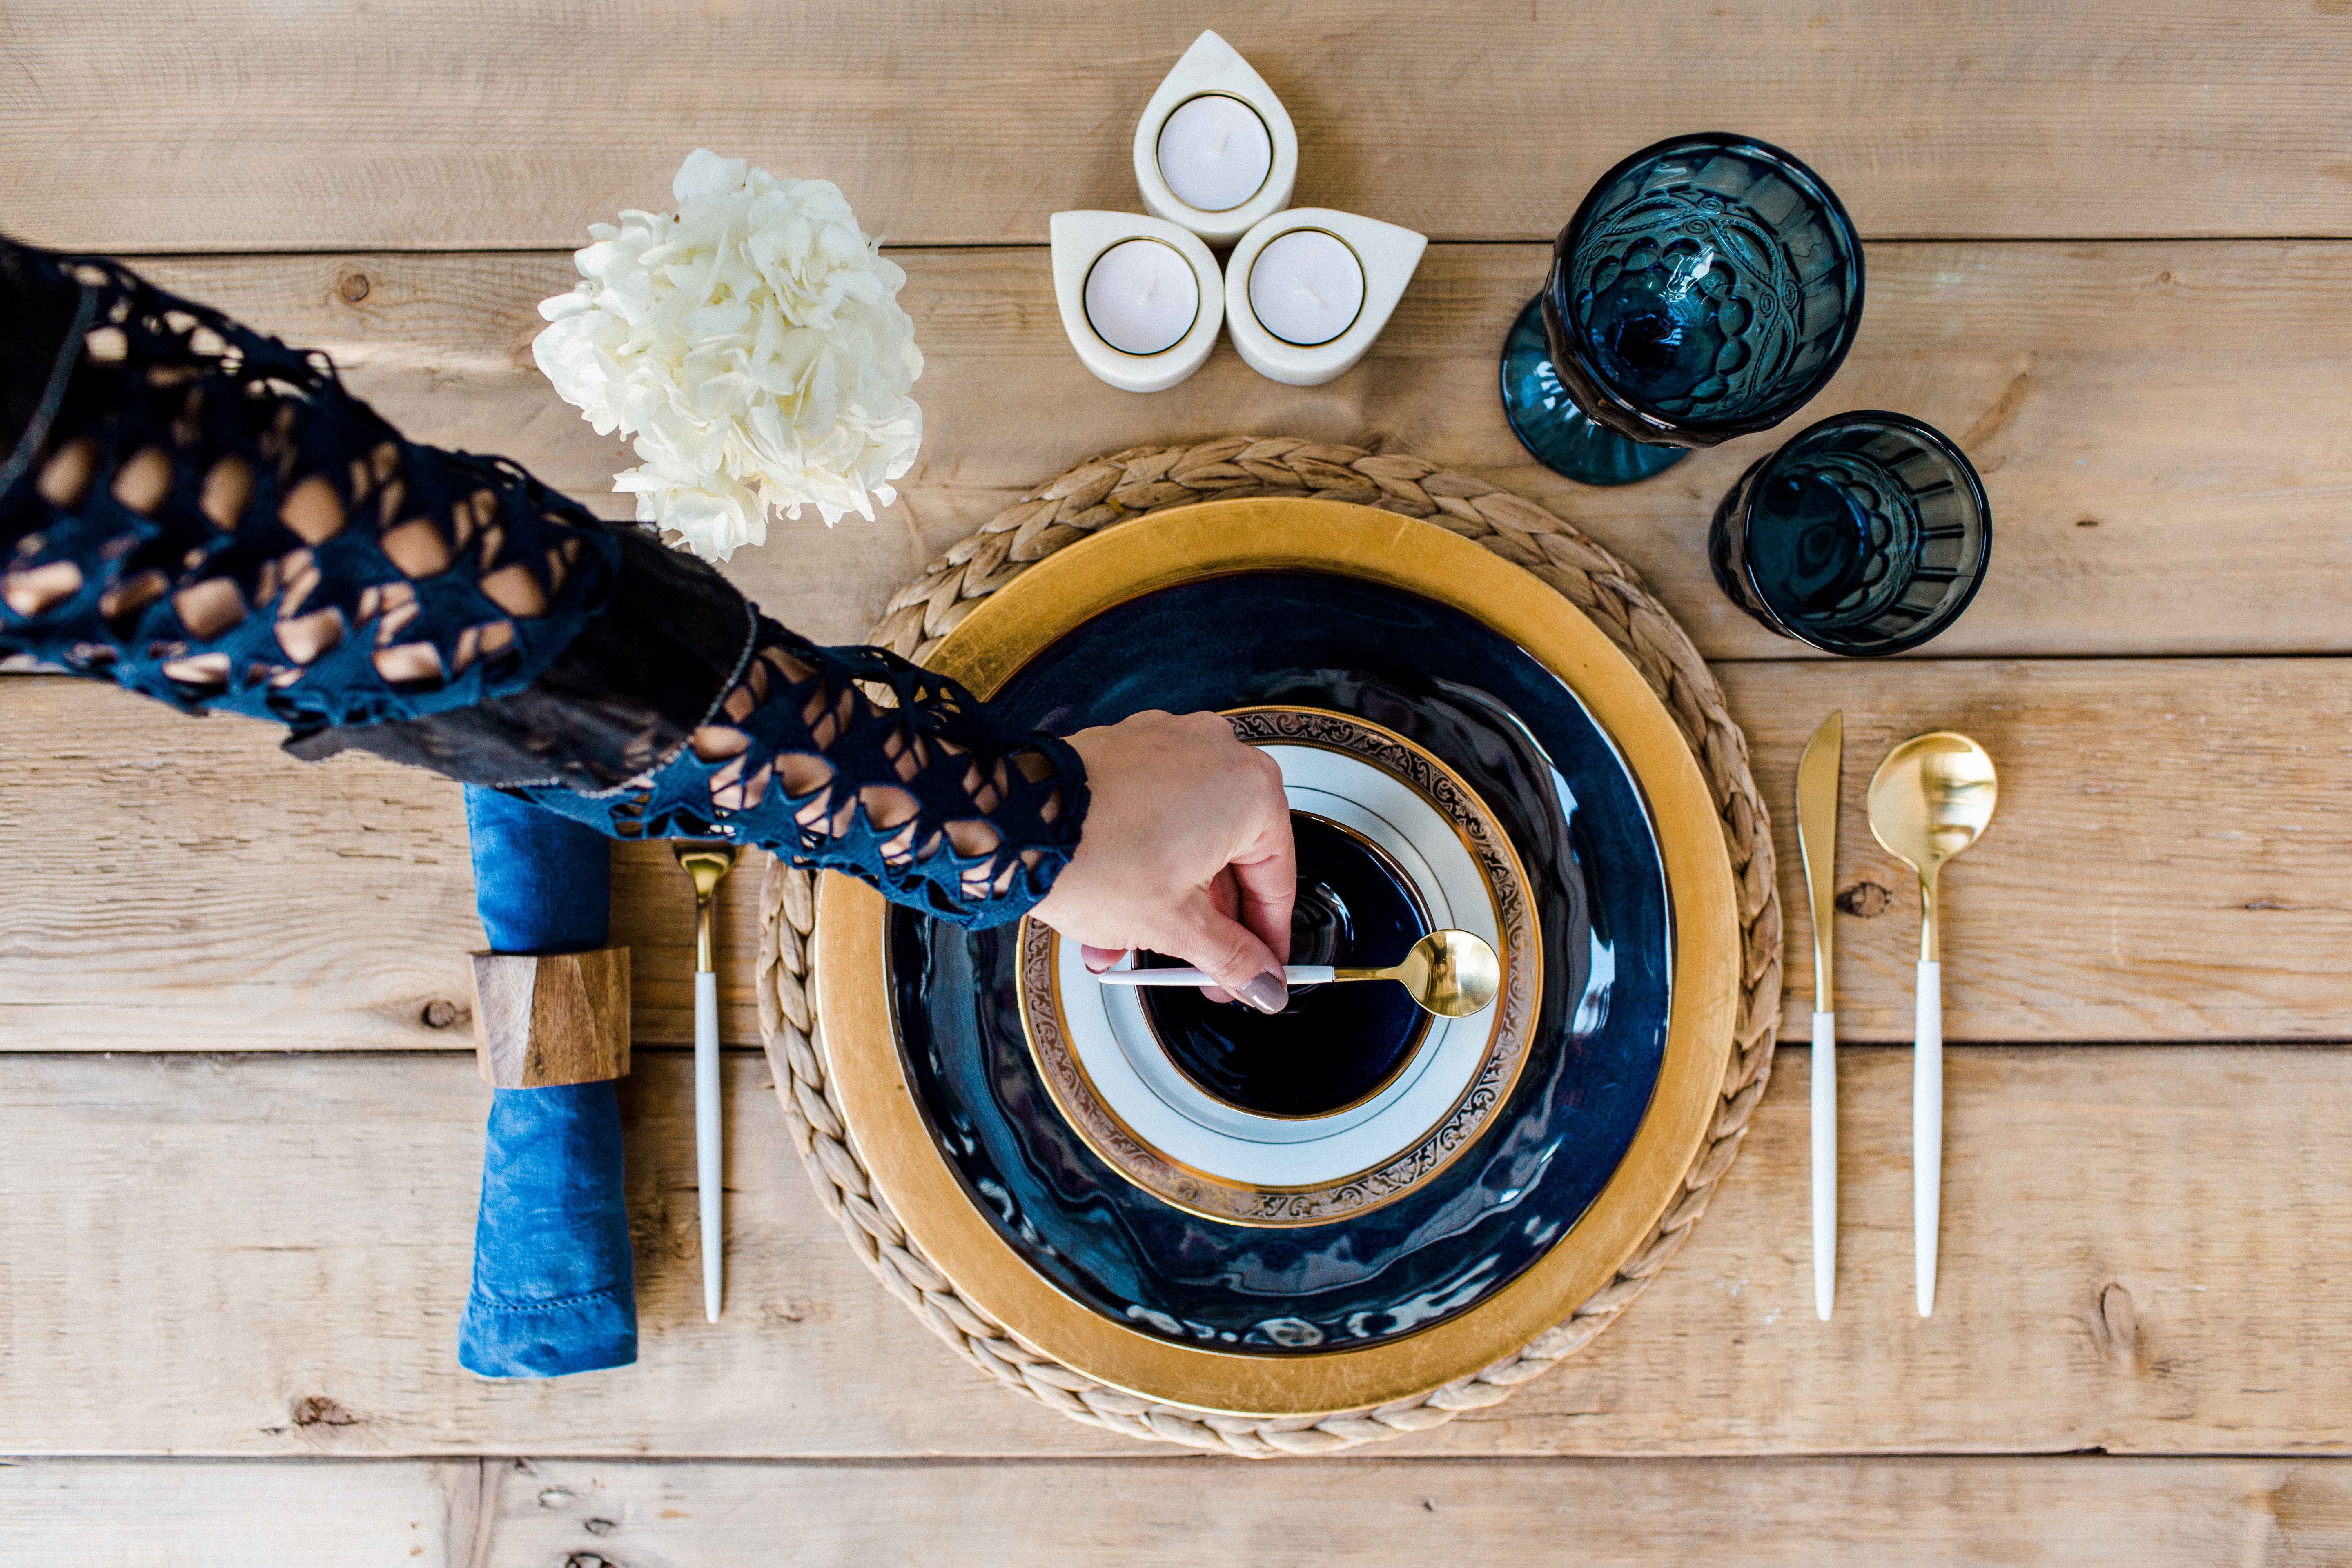 China as Everyday Dishes: How to Incorporate Your Formal Dinnerware Into Casual Place Settings